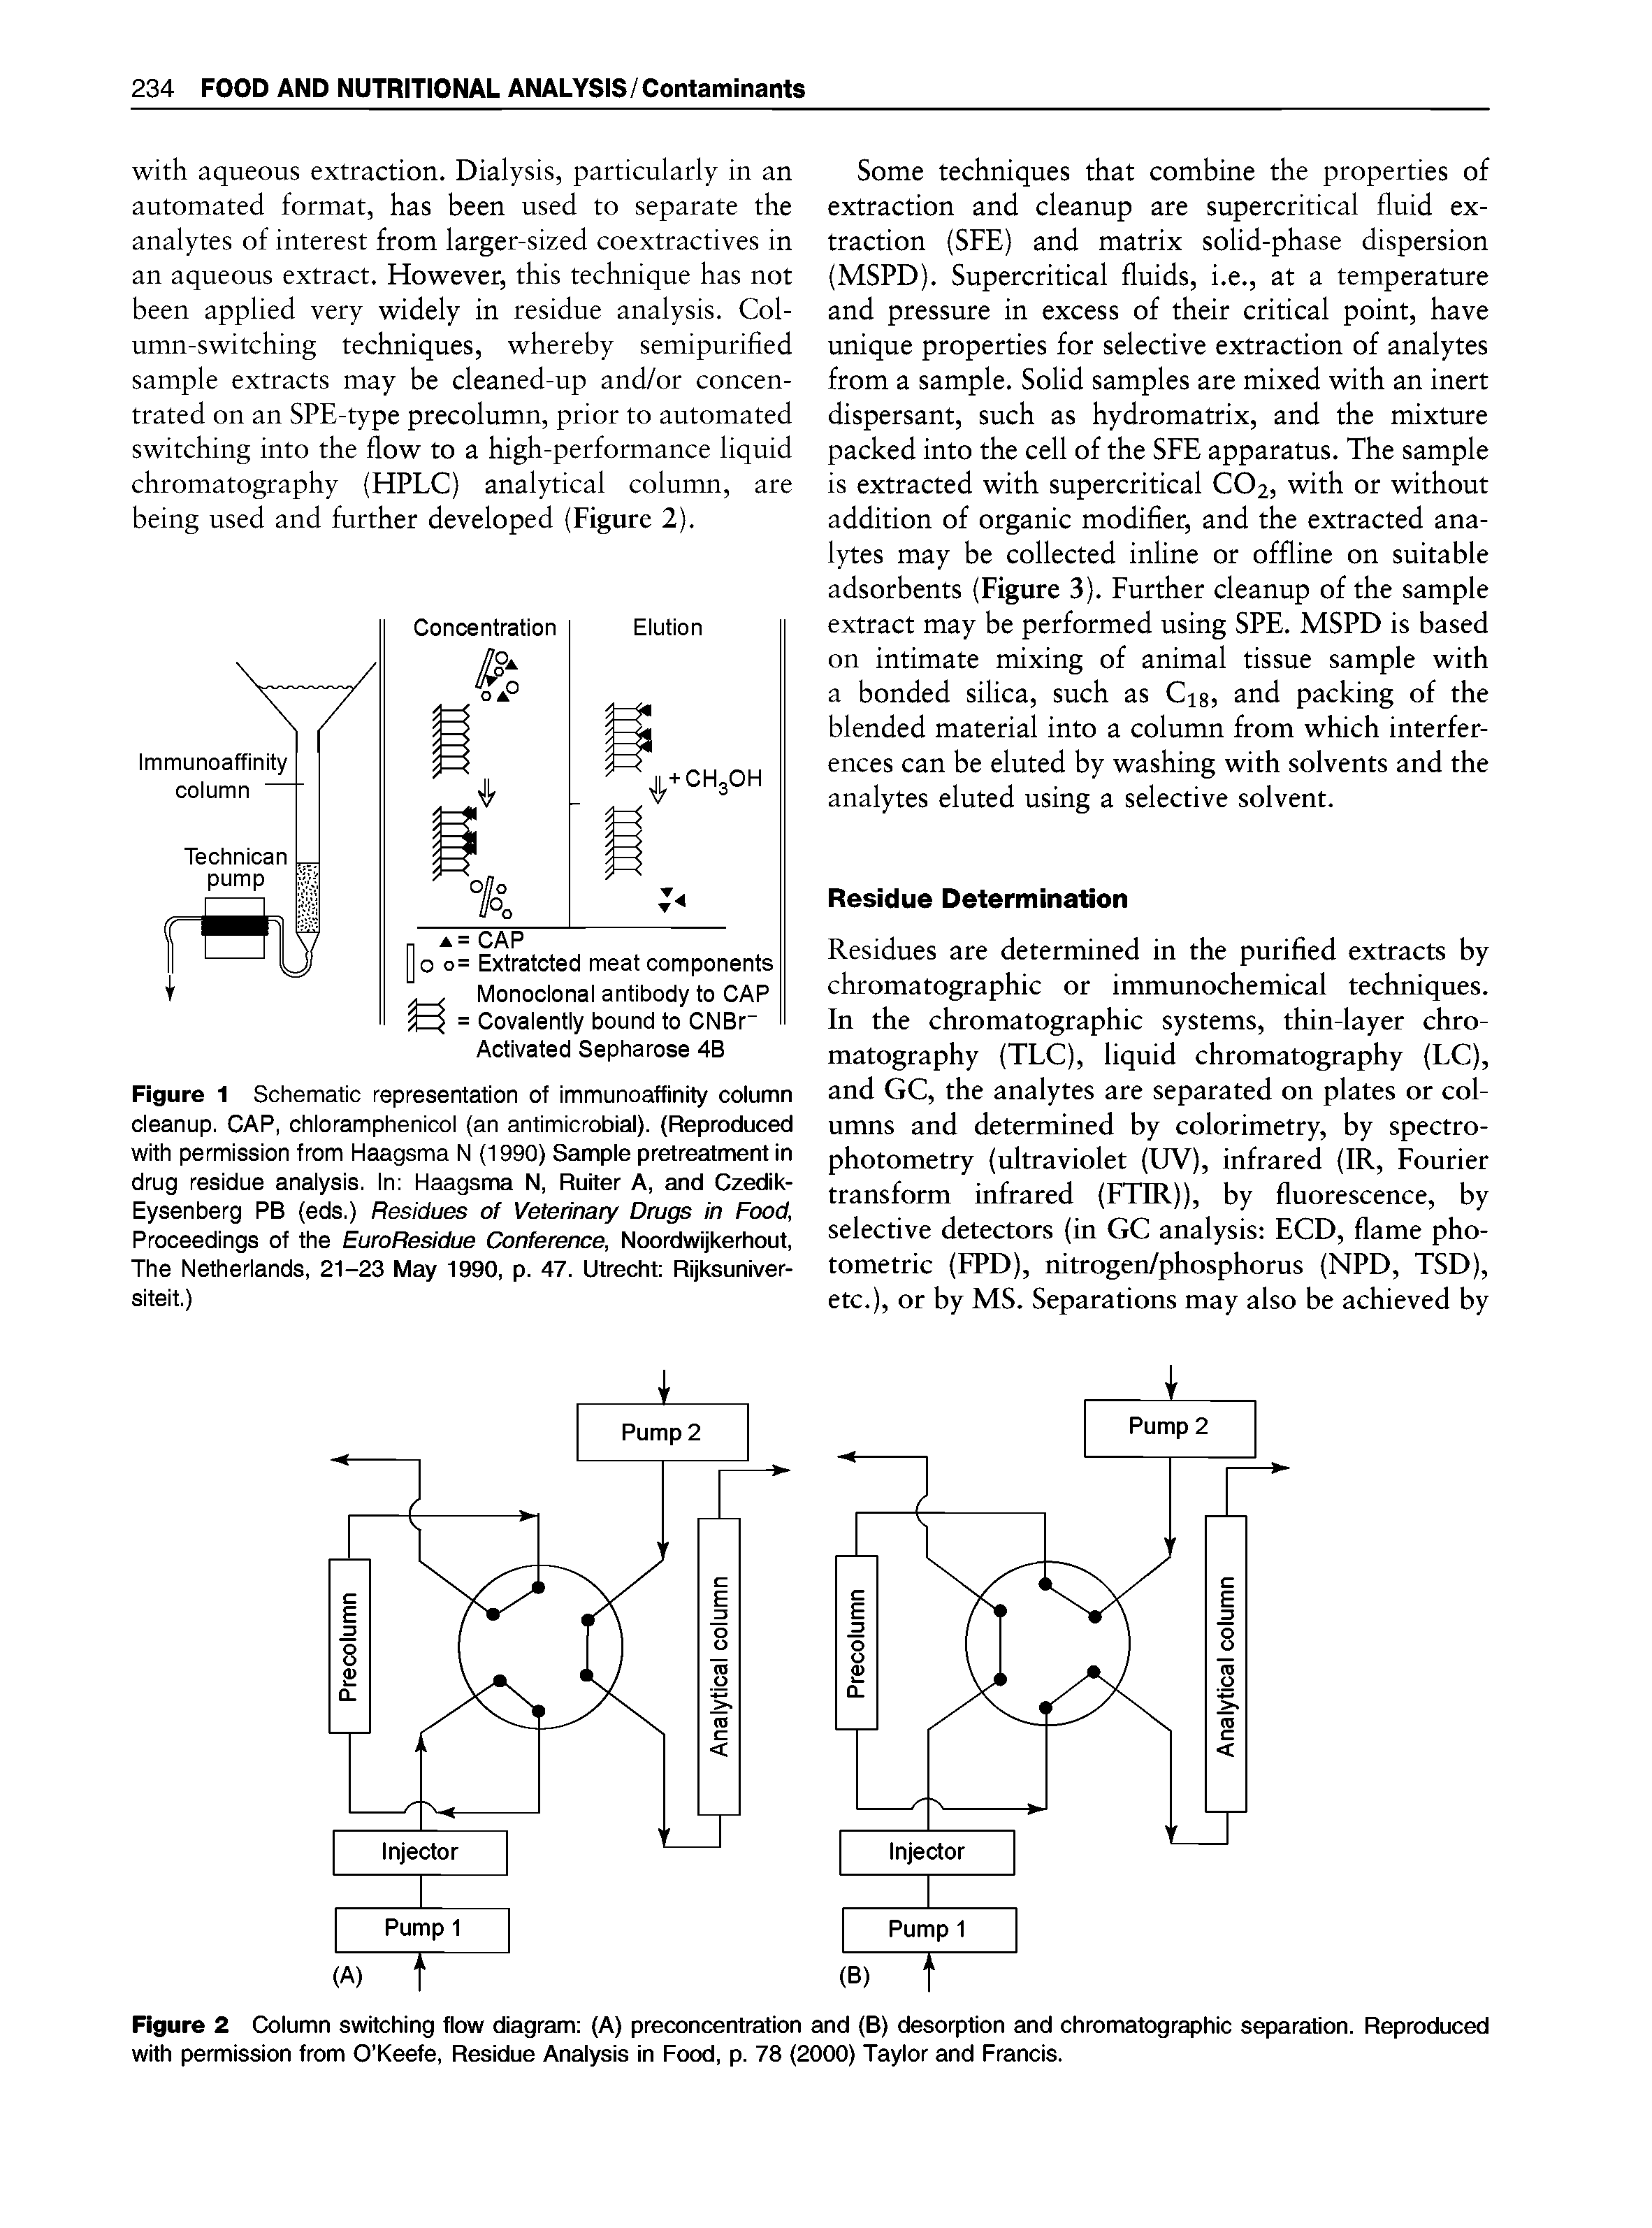 Figure 2 Column switching flow diagram (A) preconcentration and (B) desorption and chromatographic separation. Reproduced with permission from O Keefe, Residue Analysis In Food, p. 78 (2000) Taylor and Francis.